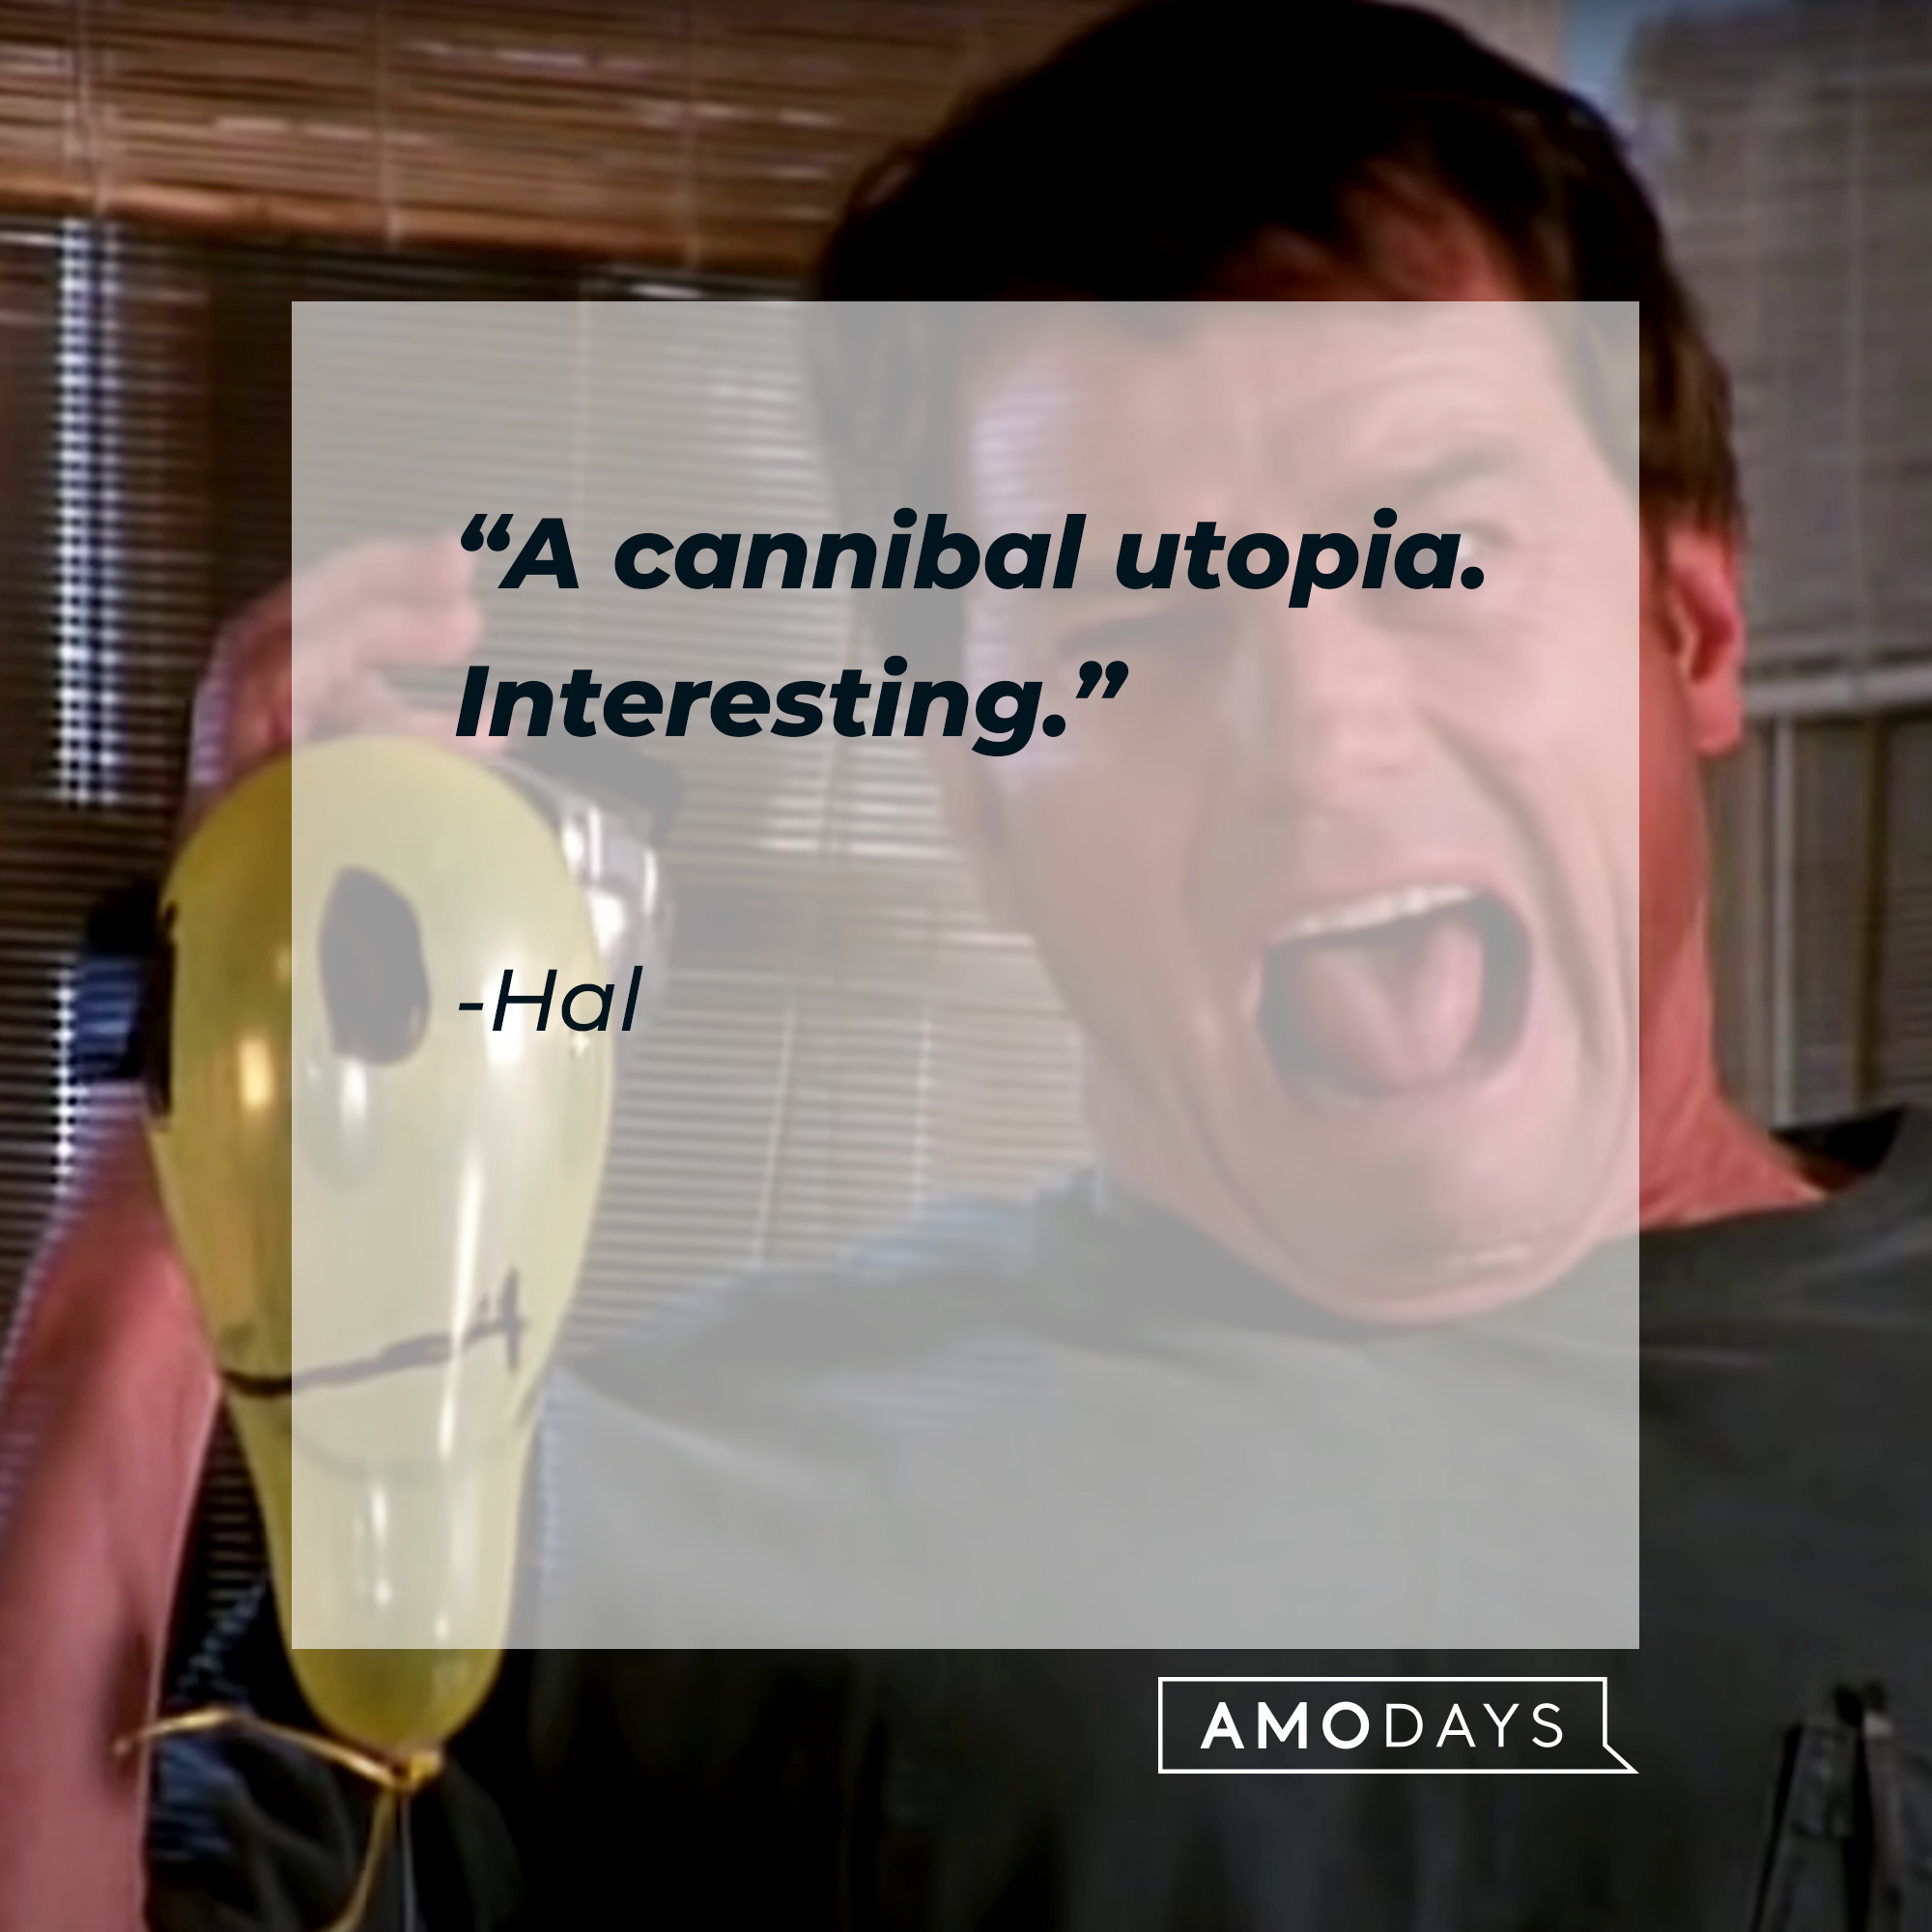 A "Malcolm in the Middle" character with Hal's quote: “A cannibal utopia. Interesting.” | Source: YouTube.com/Channel4